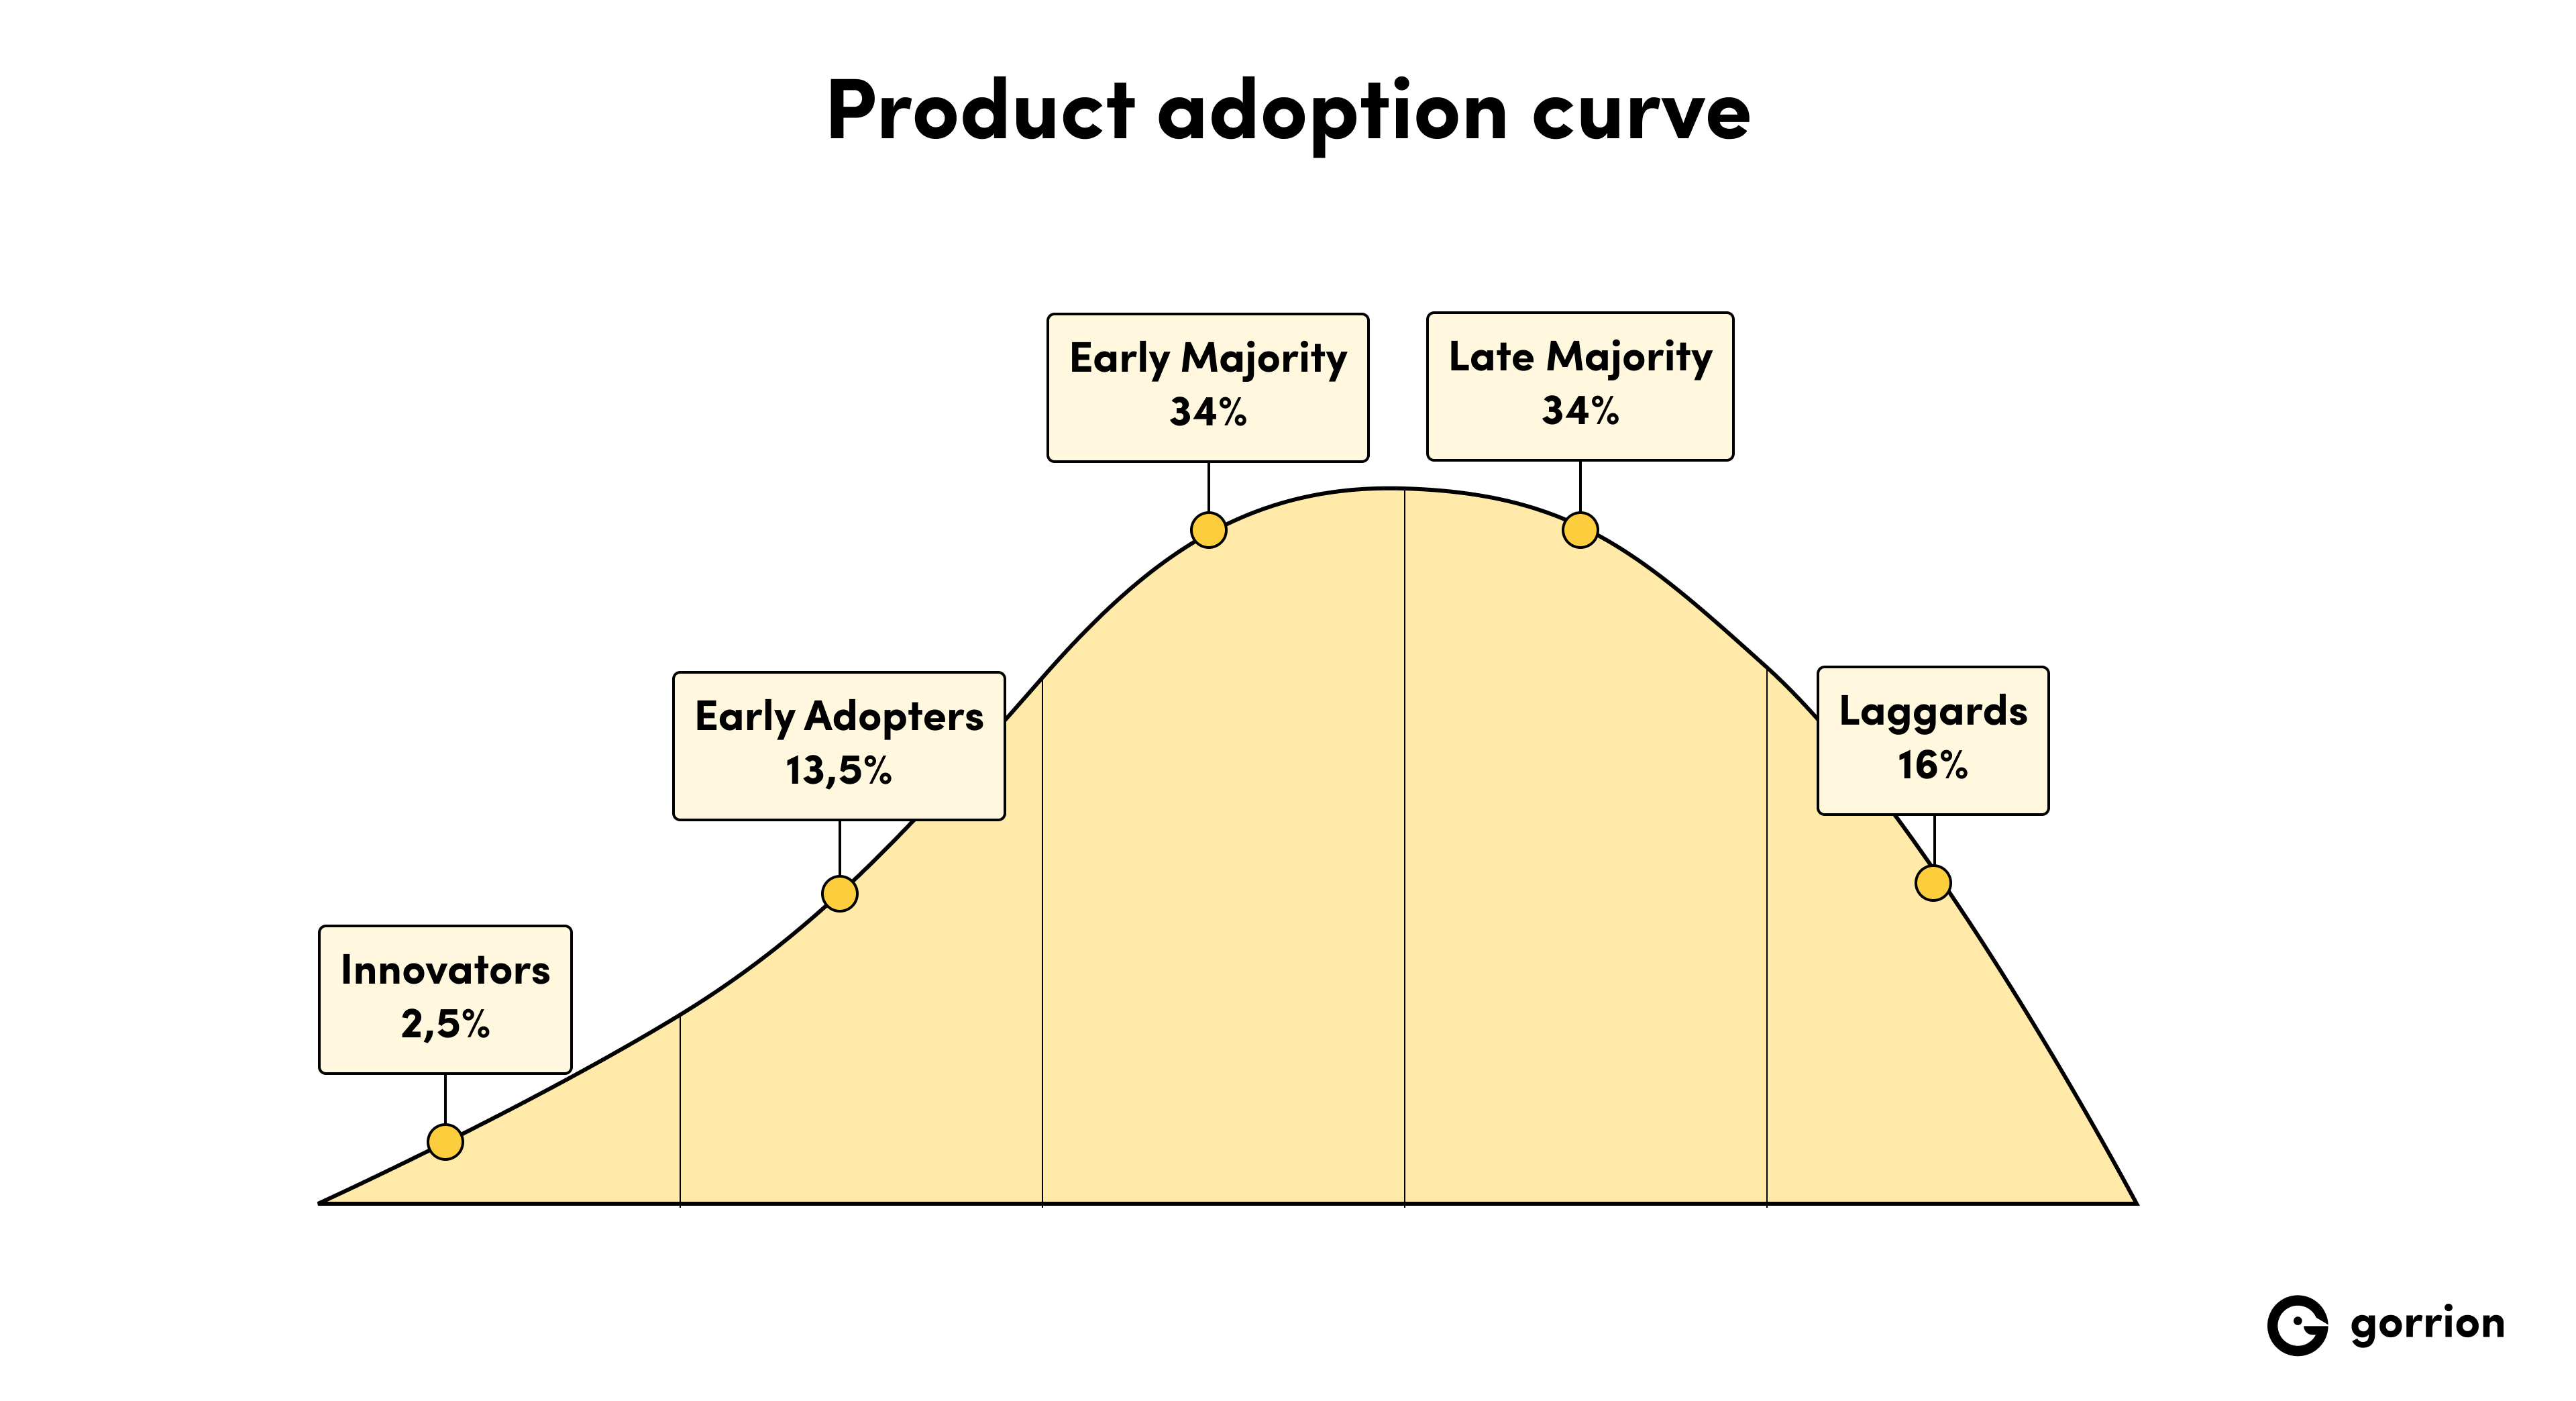 Product adoption curve: innovators make 2.5% of all adopters; early adopters - 13.5%; early majority - 34%; late majority - 34%; and laggards - 16%.